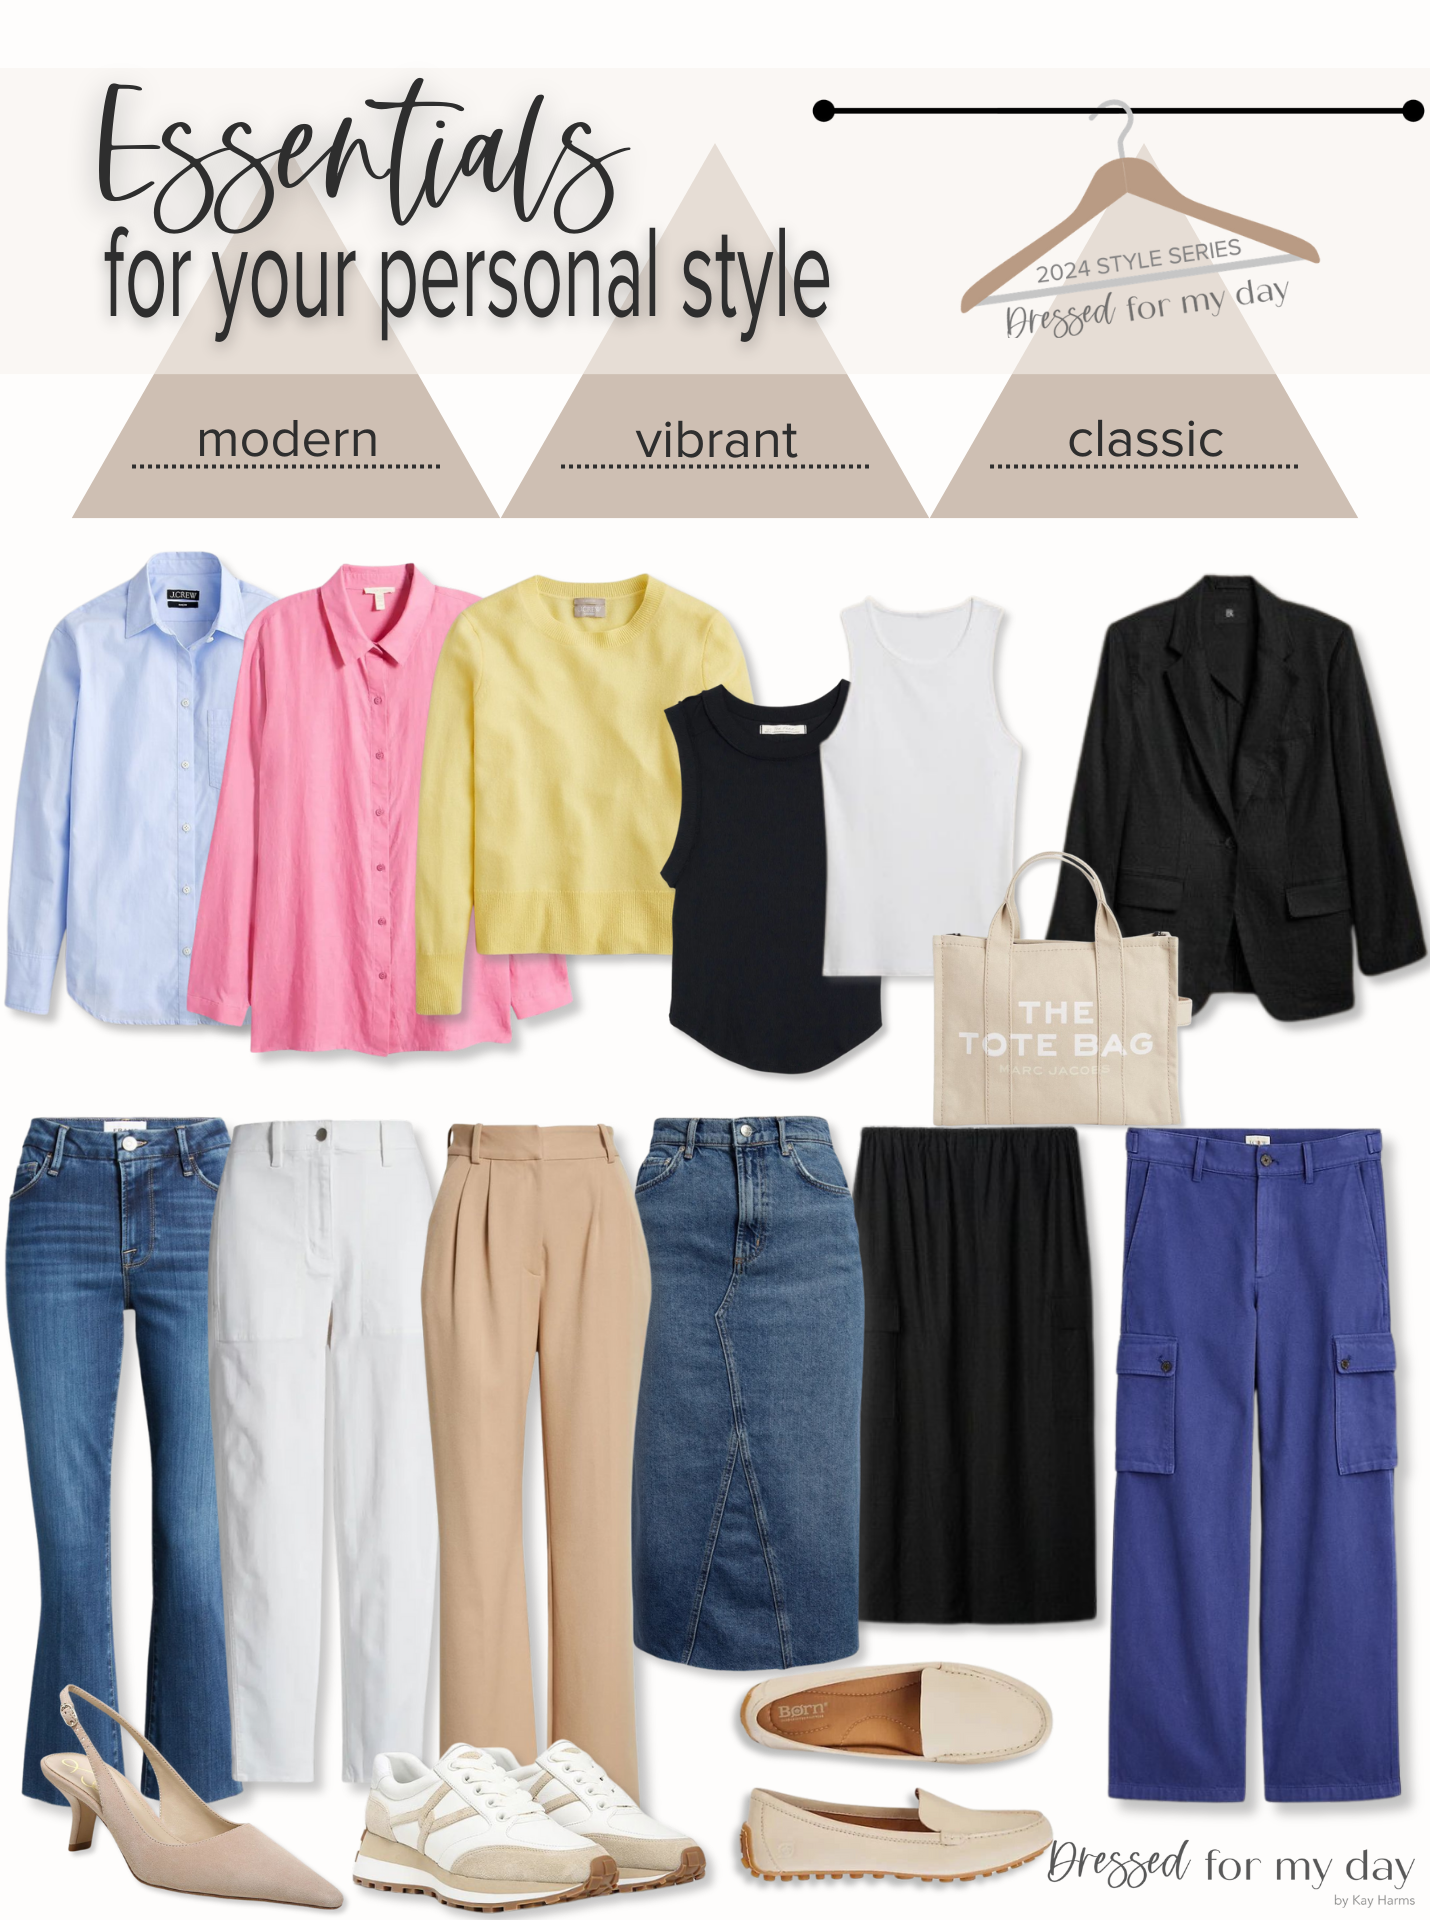 Essentials for Personal Styles 1 (2)